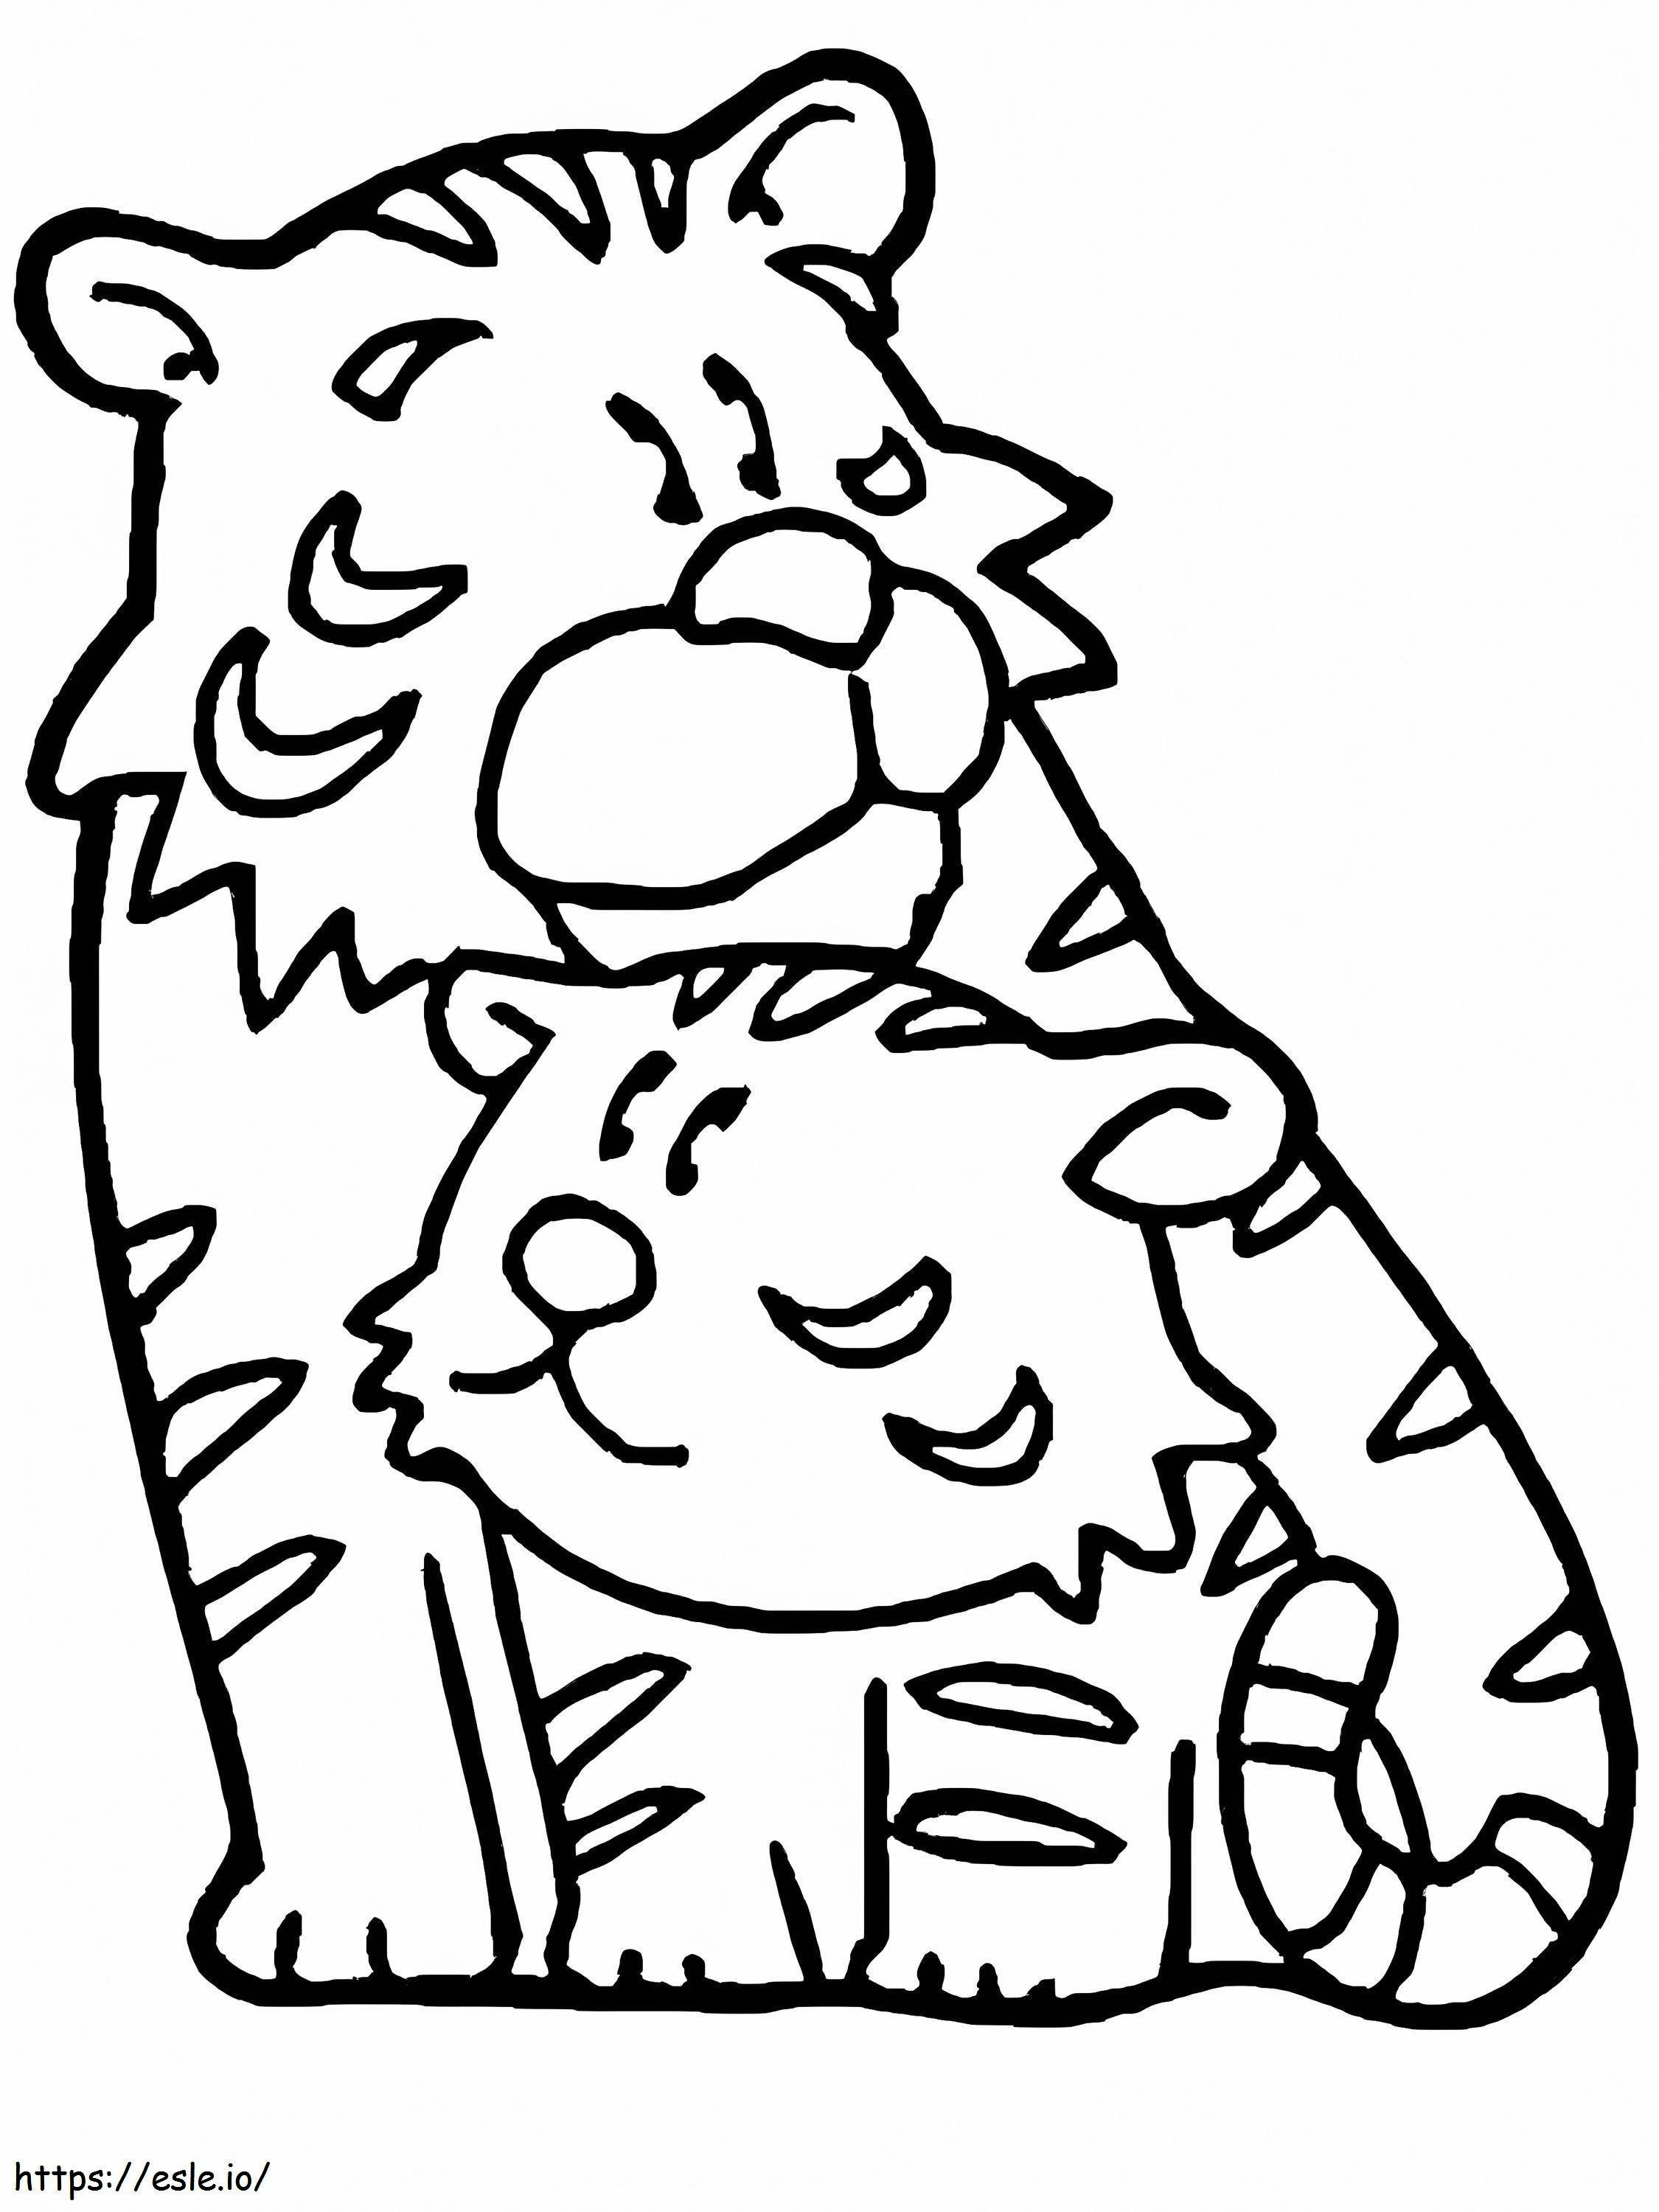 Tiger Family coloring page